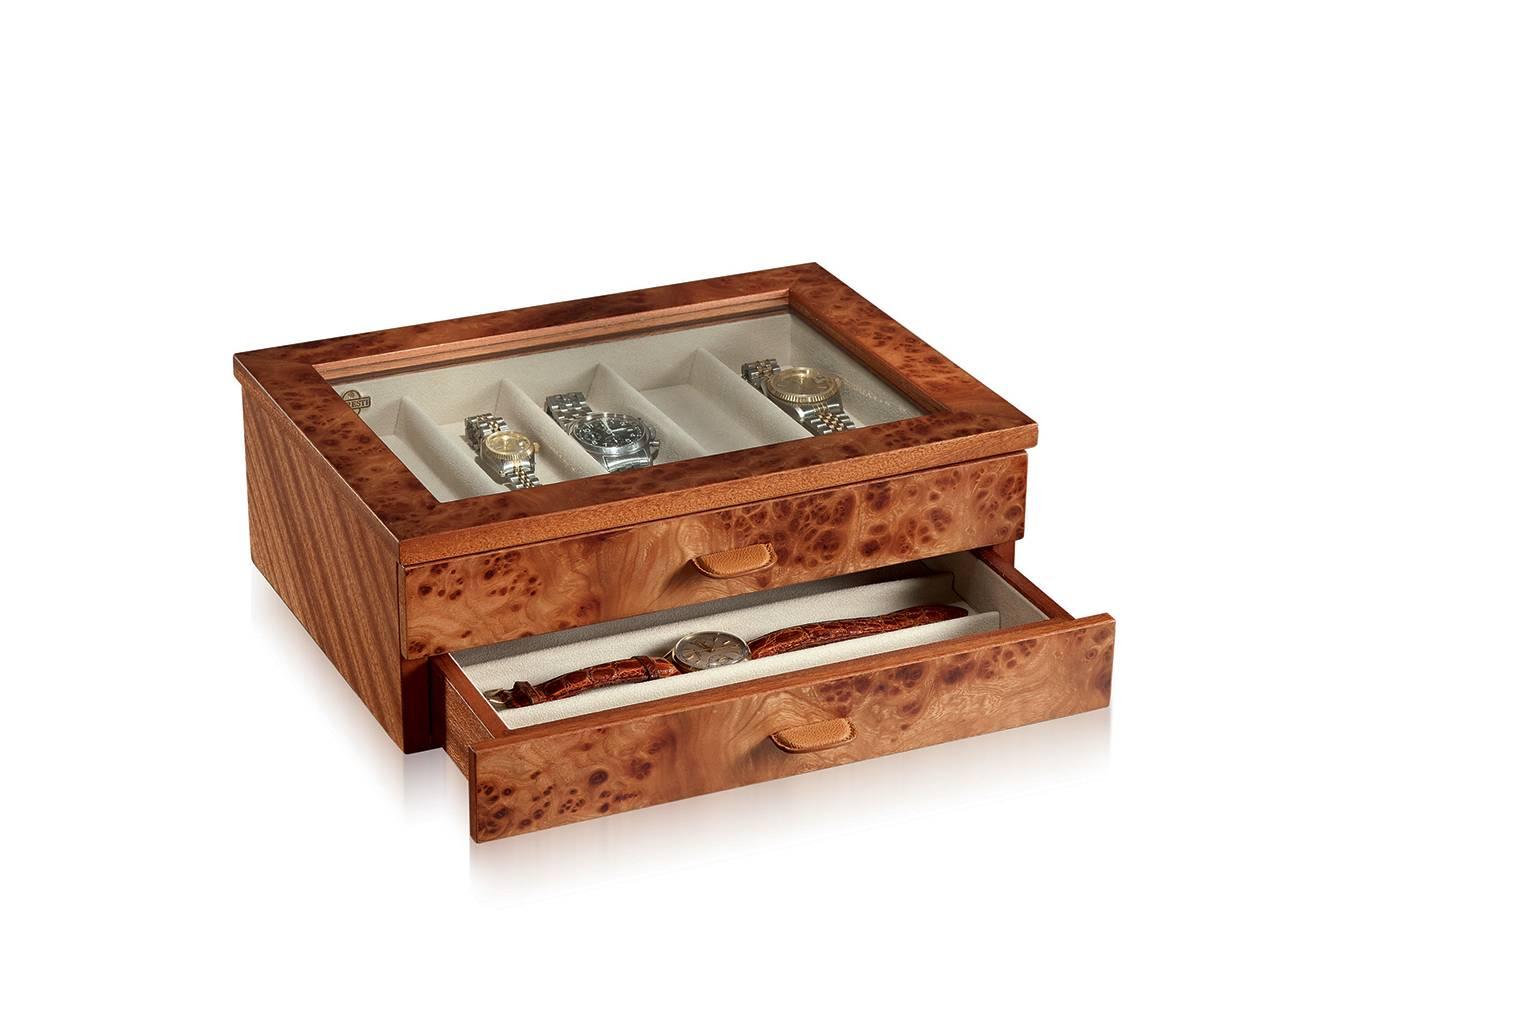 Elm briar and striped mahogany for your collectable watches. Leather handles. Briar box for nine watches.